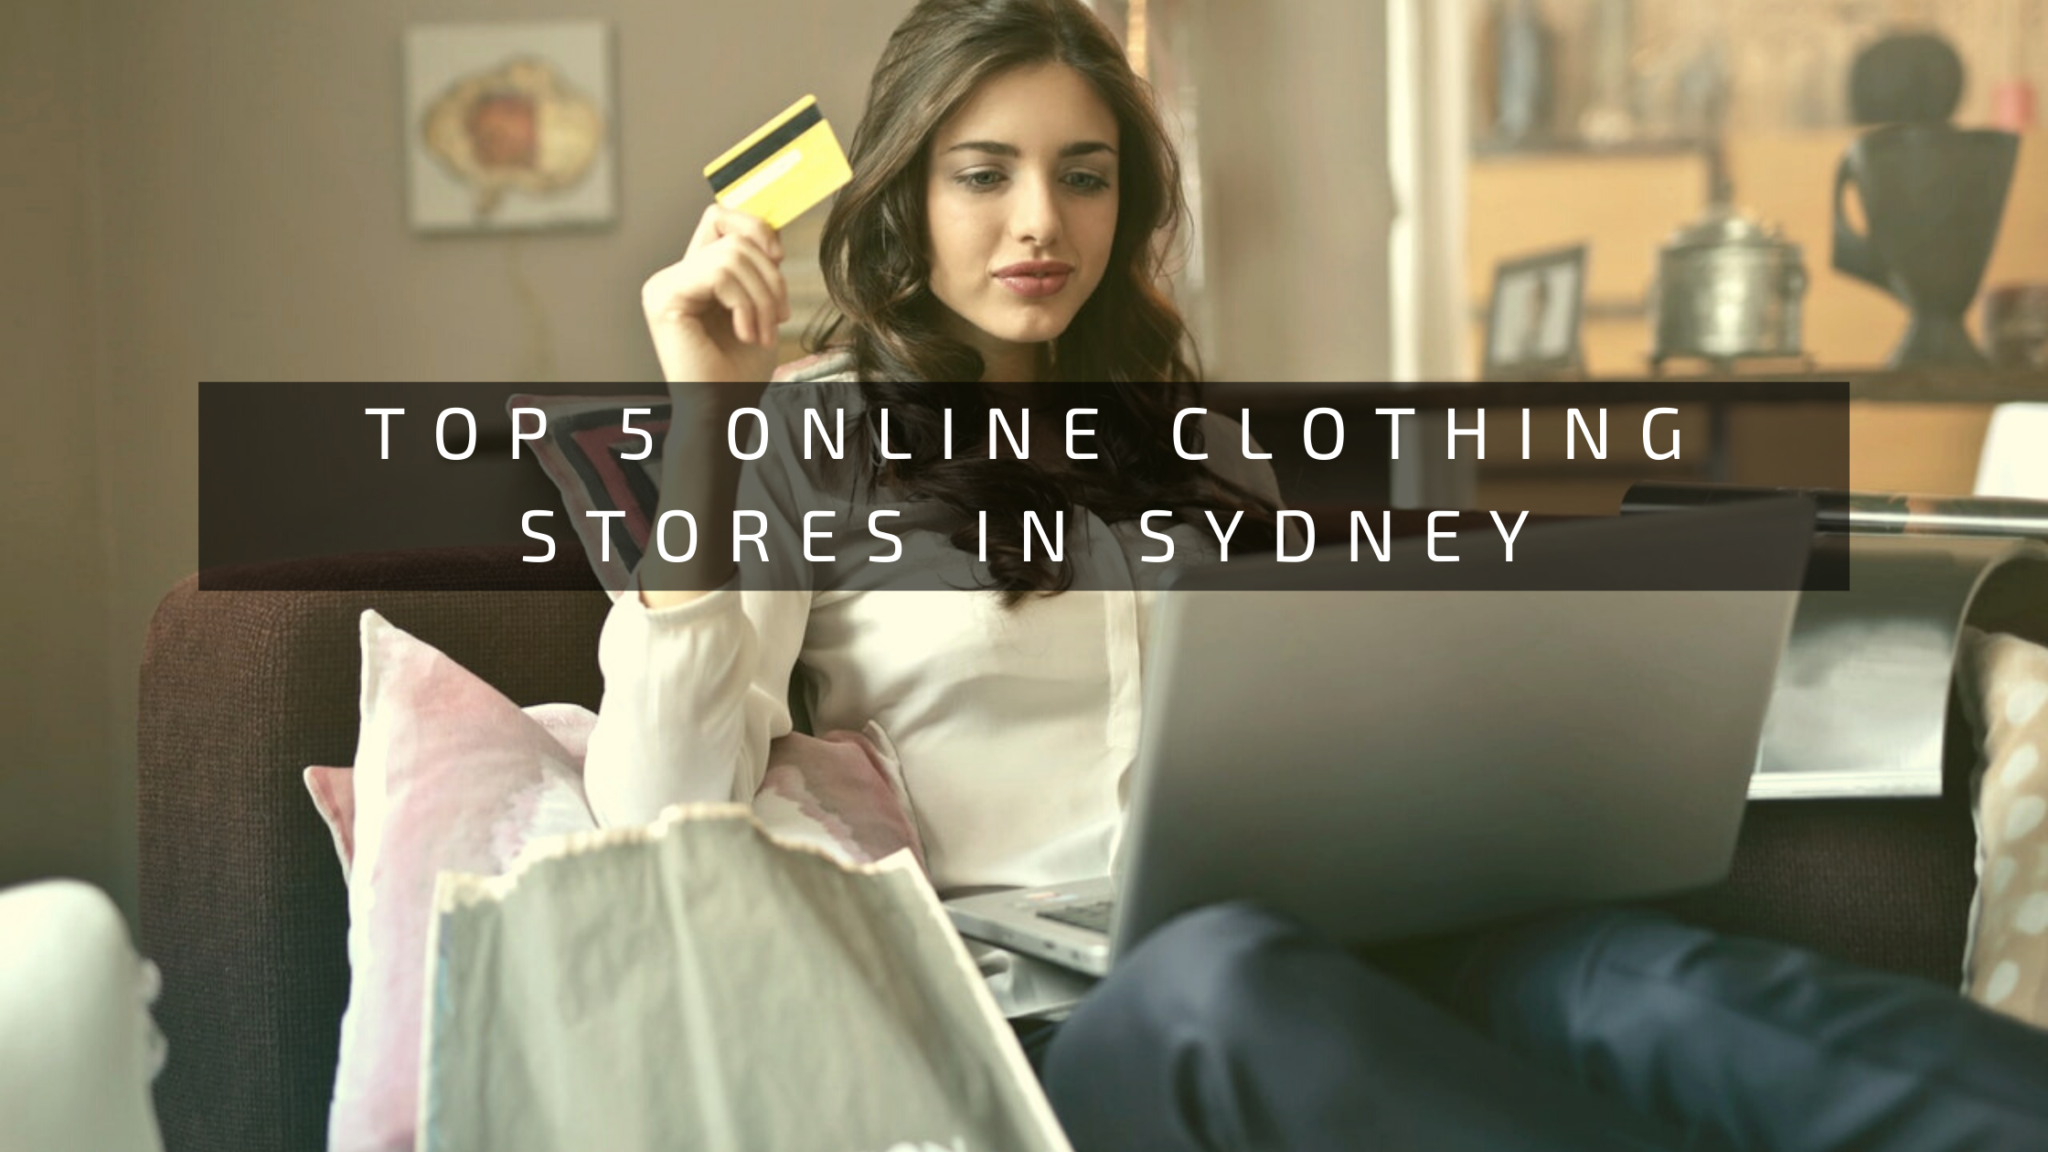 Top 5 online clothing stores in Sydney - Anata Digital